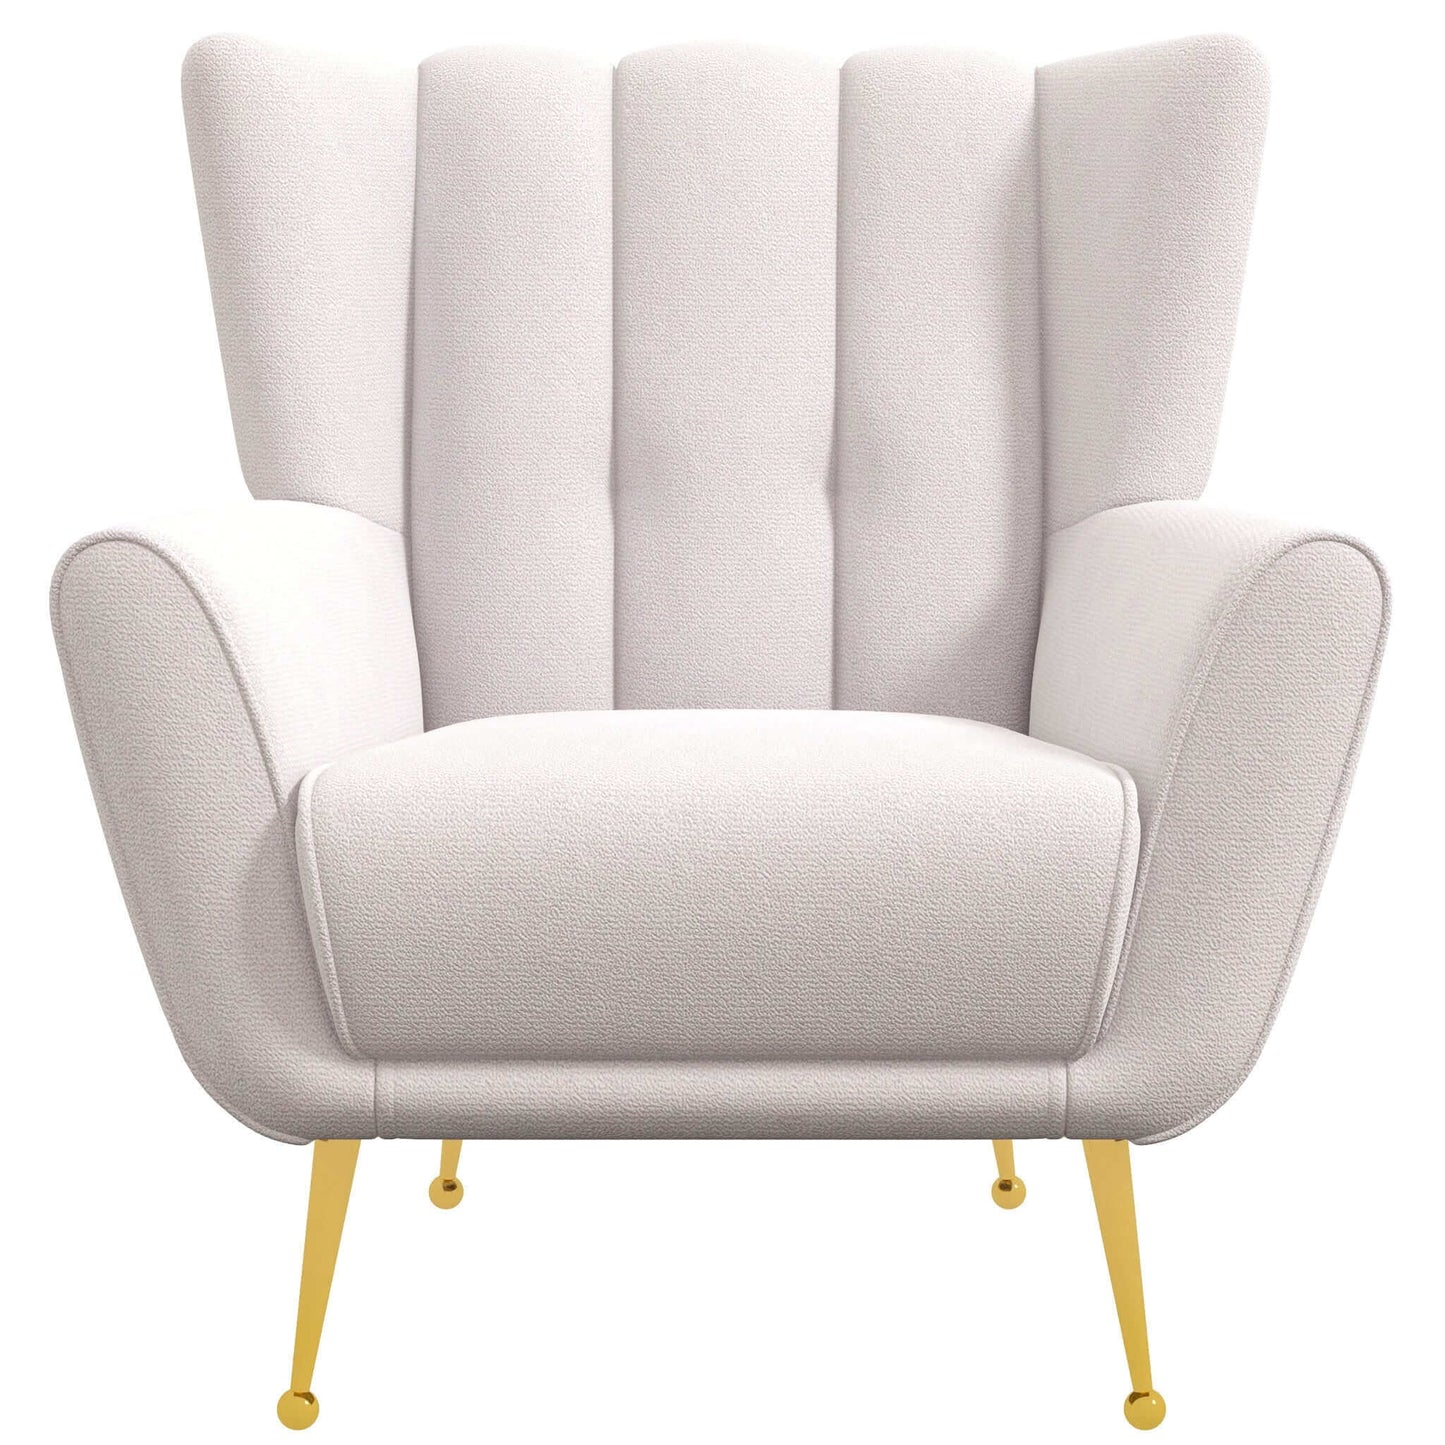 Ashcroft Furniture Co Lounge Chairs Cream Gianna Mid-Century Modern Tufted French Boucle Armchair